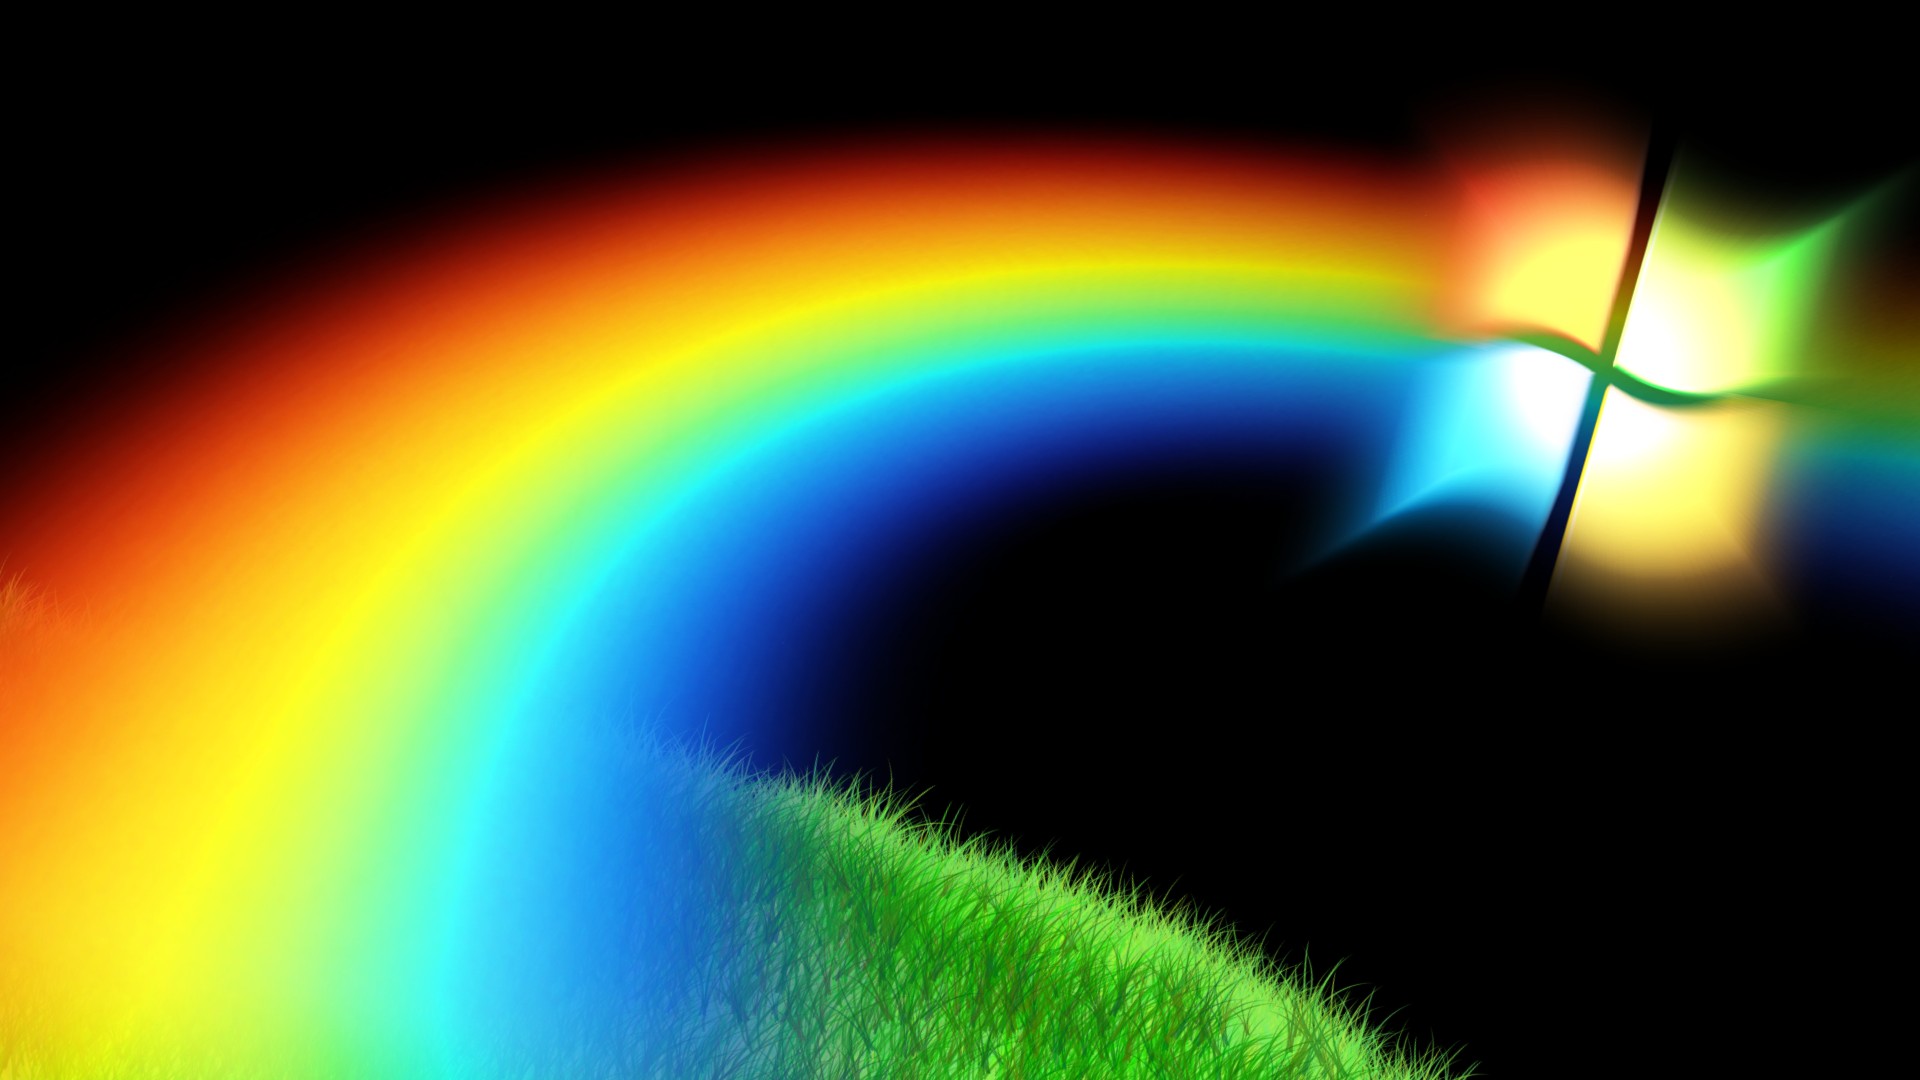 HD Cute Rainbow Backgrounds with image resolution 1920x1080 pixel. You can use this wallpaper as background for your desktop Computer Screensavers, Android or iPhone smartphones